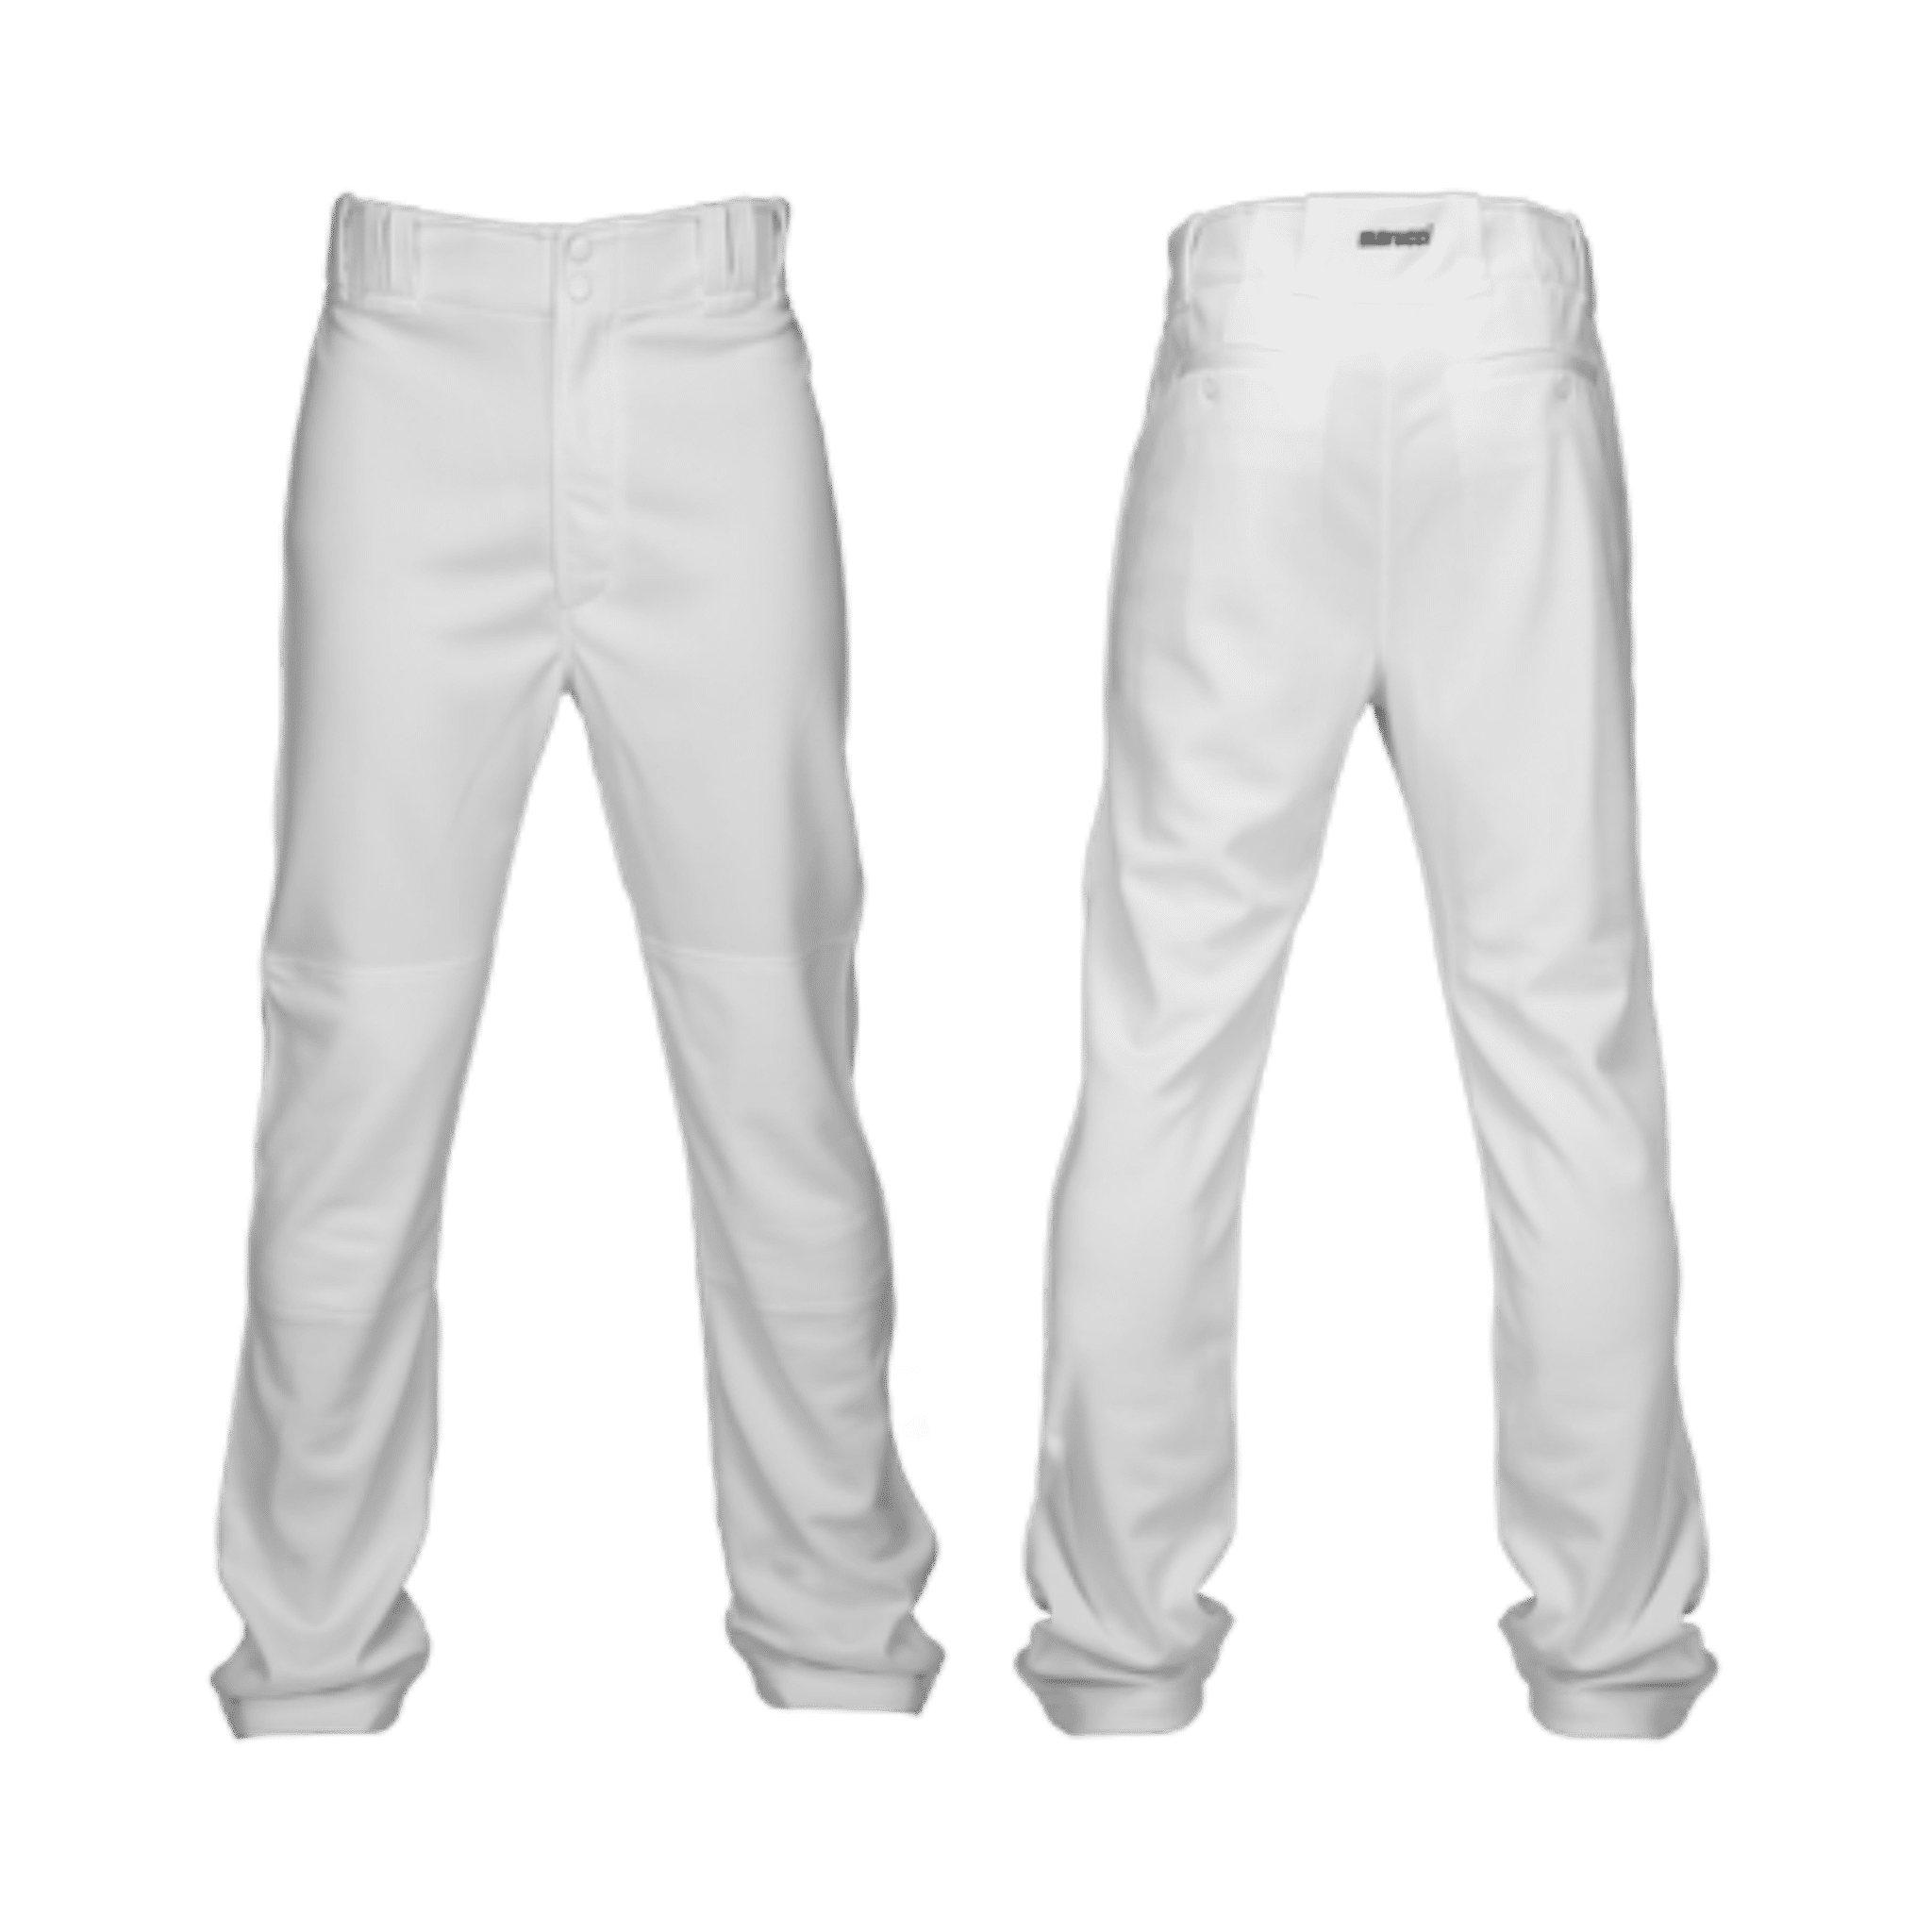 Clearance, Maly Dance Practice Pencil Pants MF191402